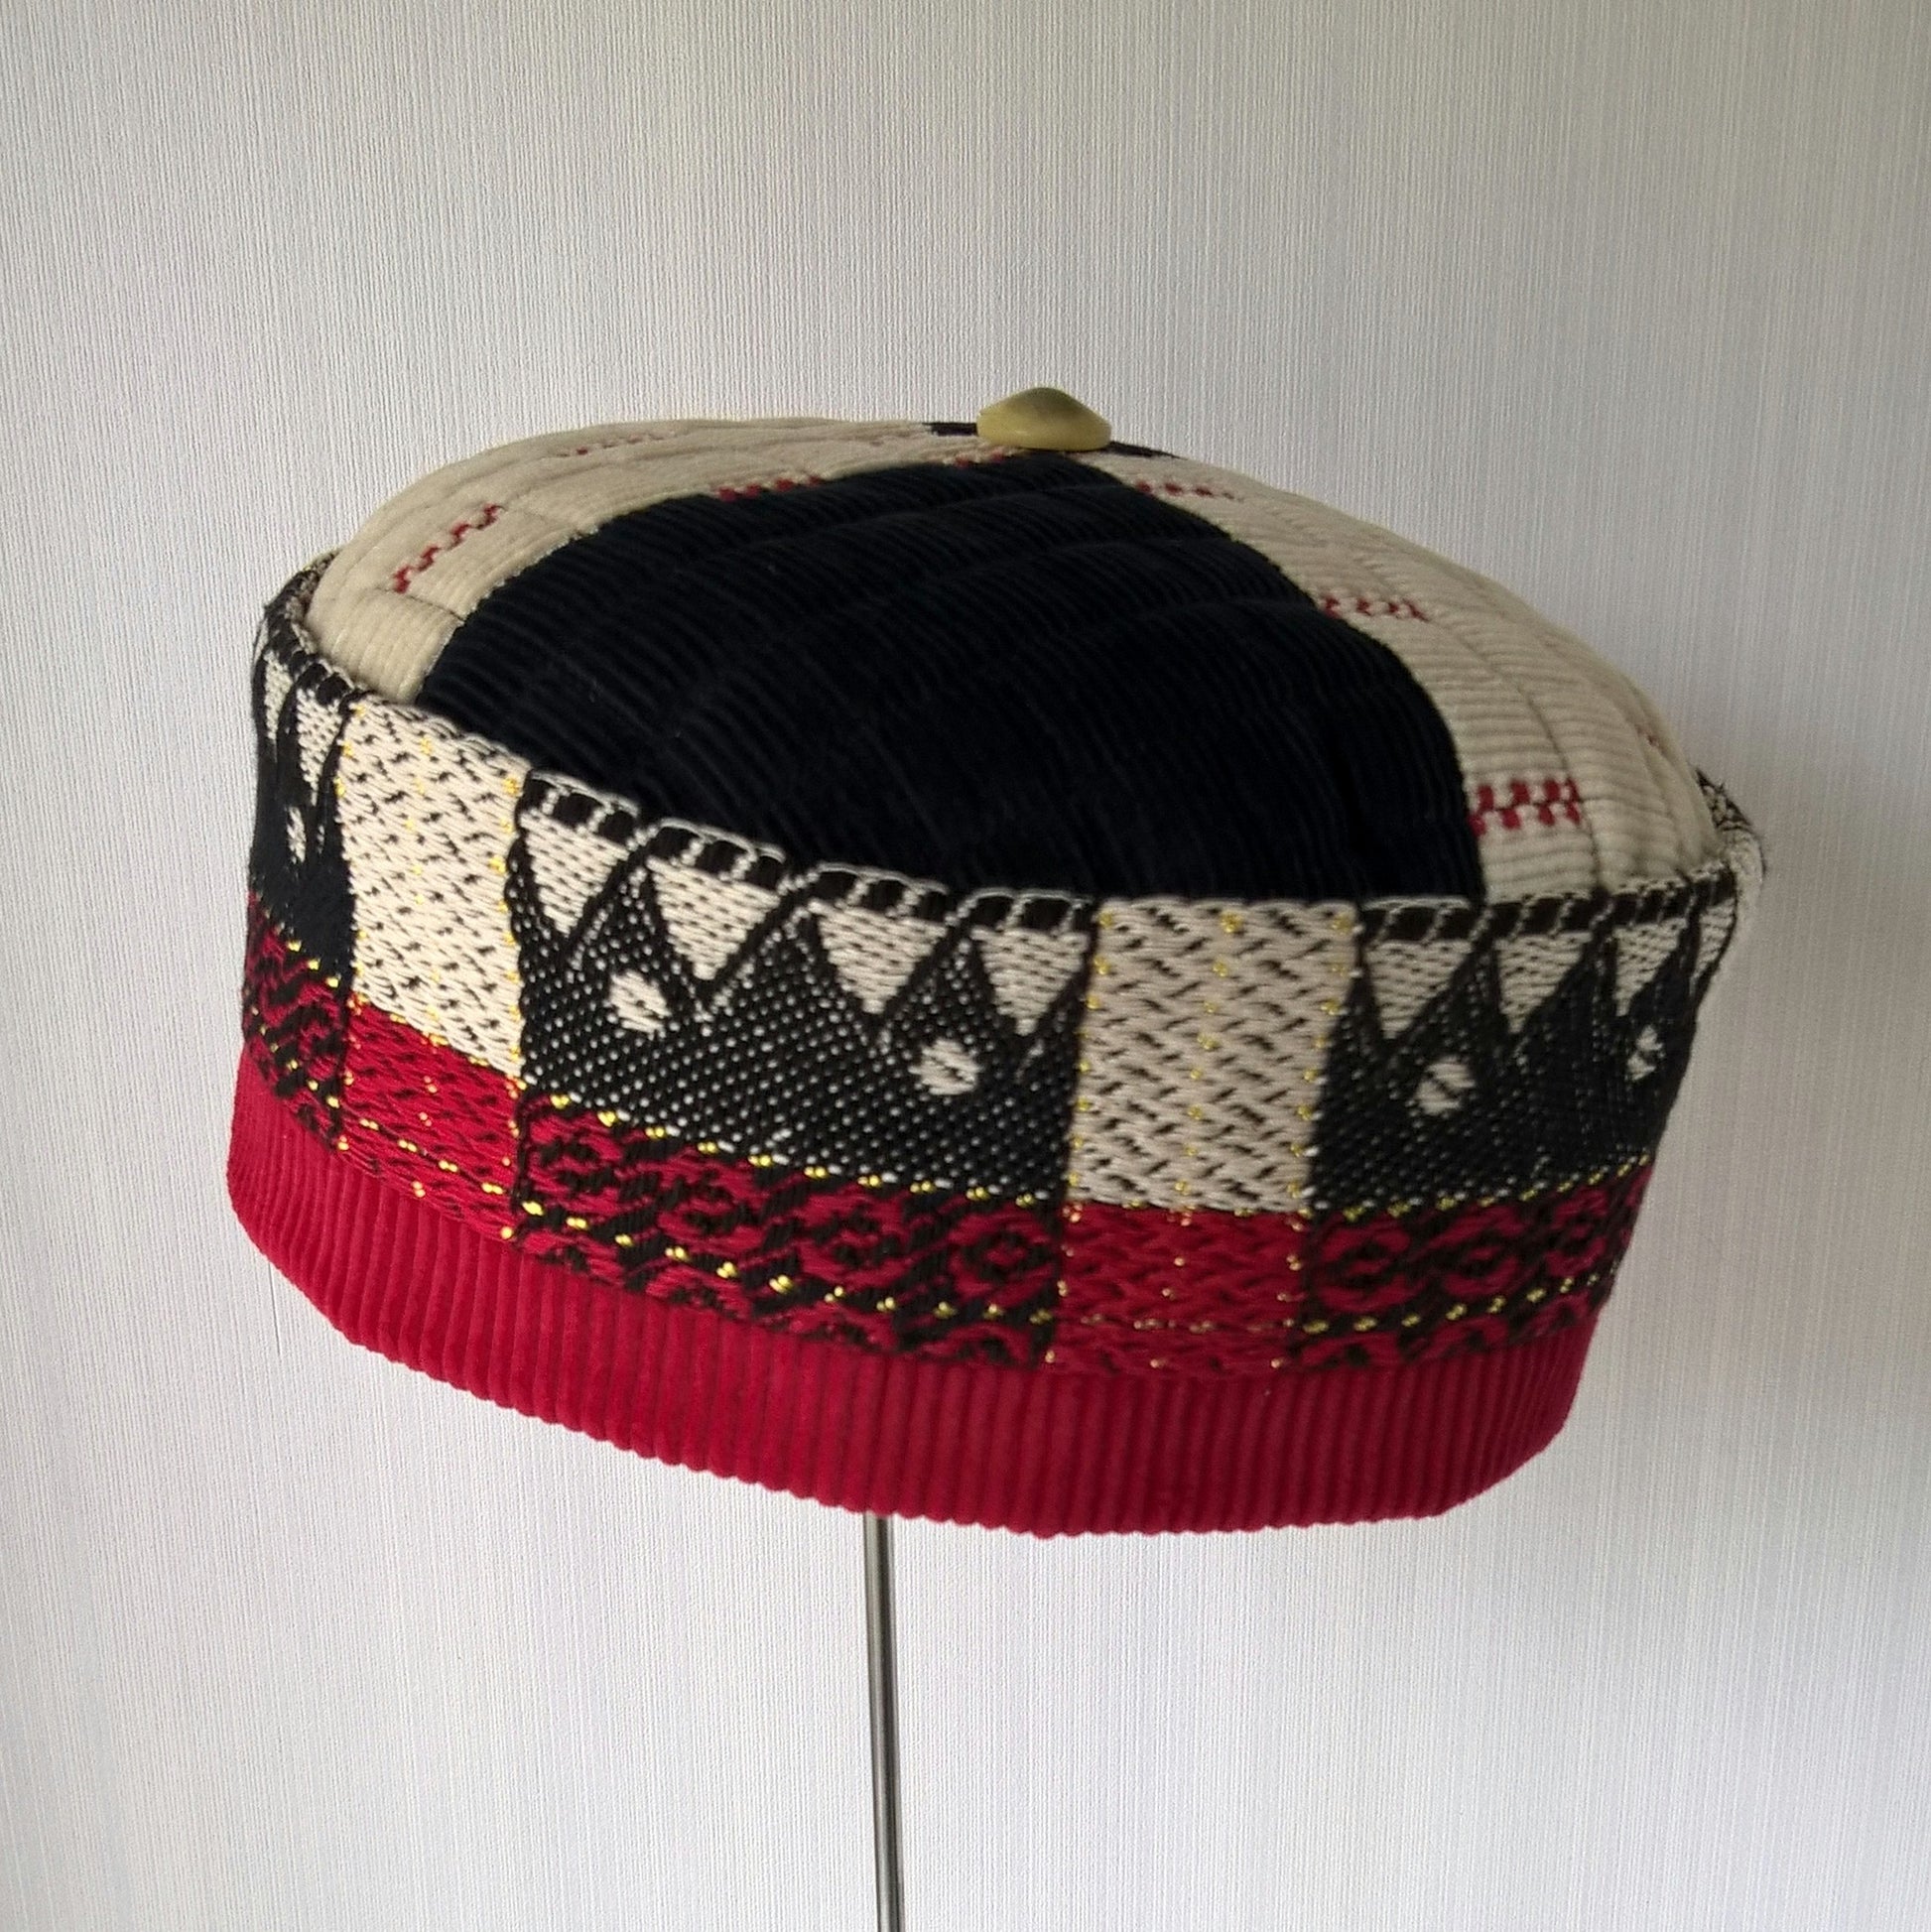 The ethnic smoking cap can be worn with or without the removable tassel